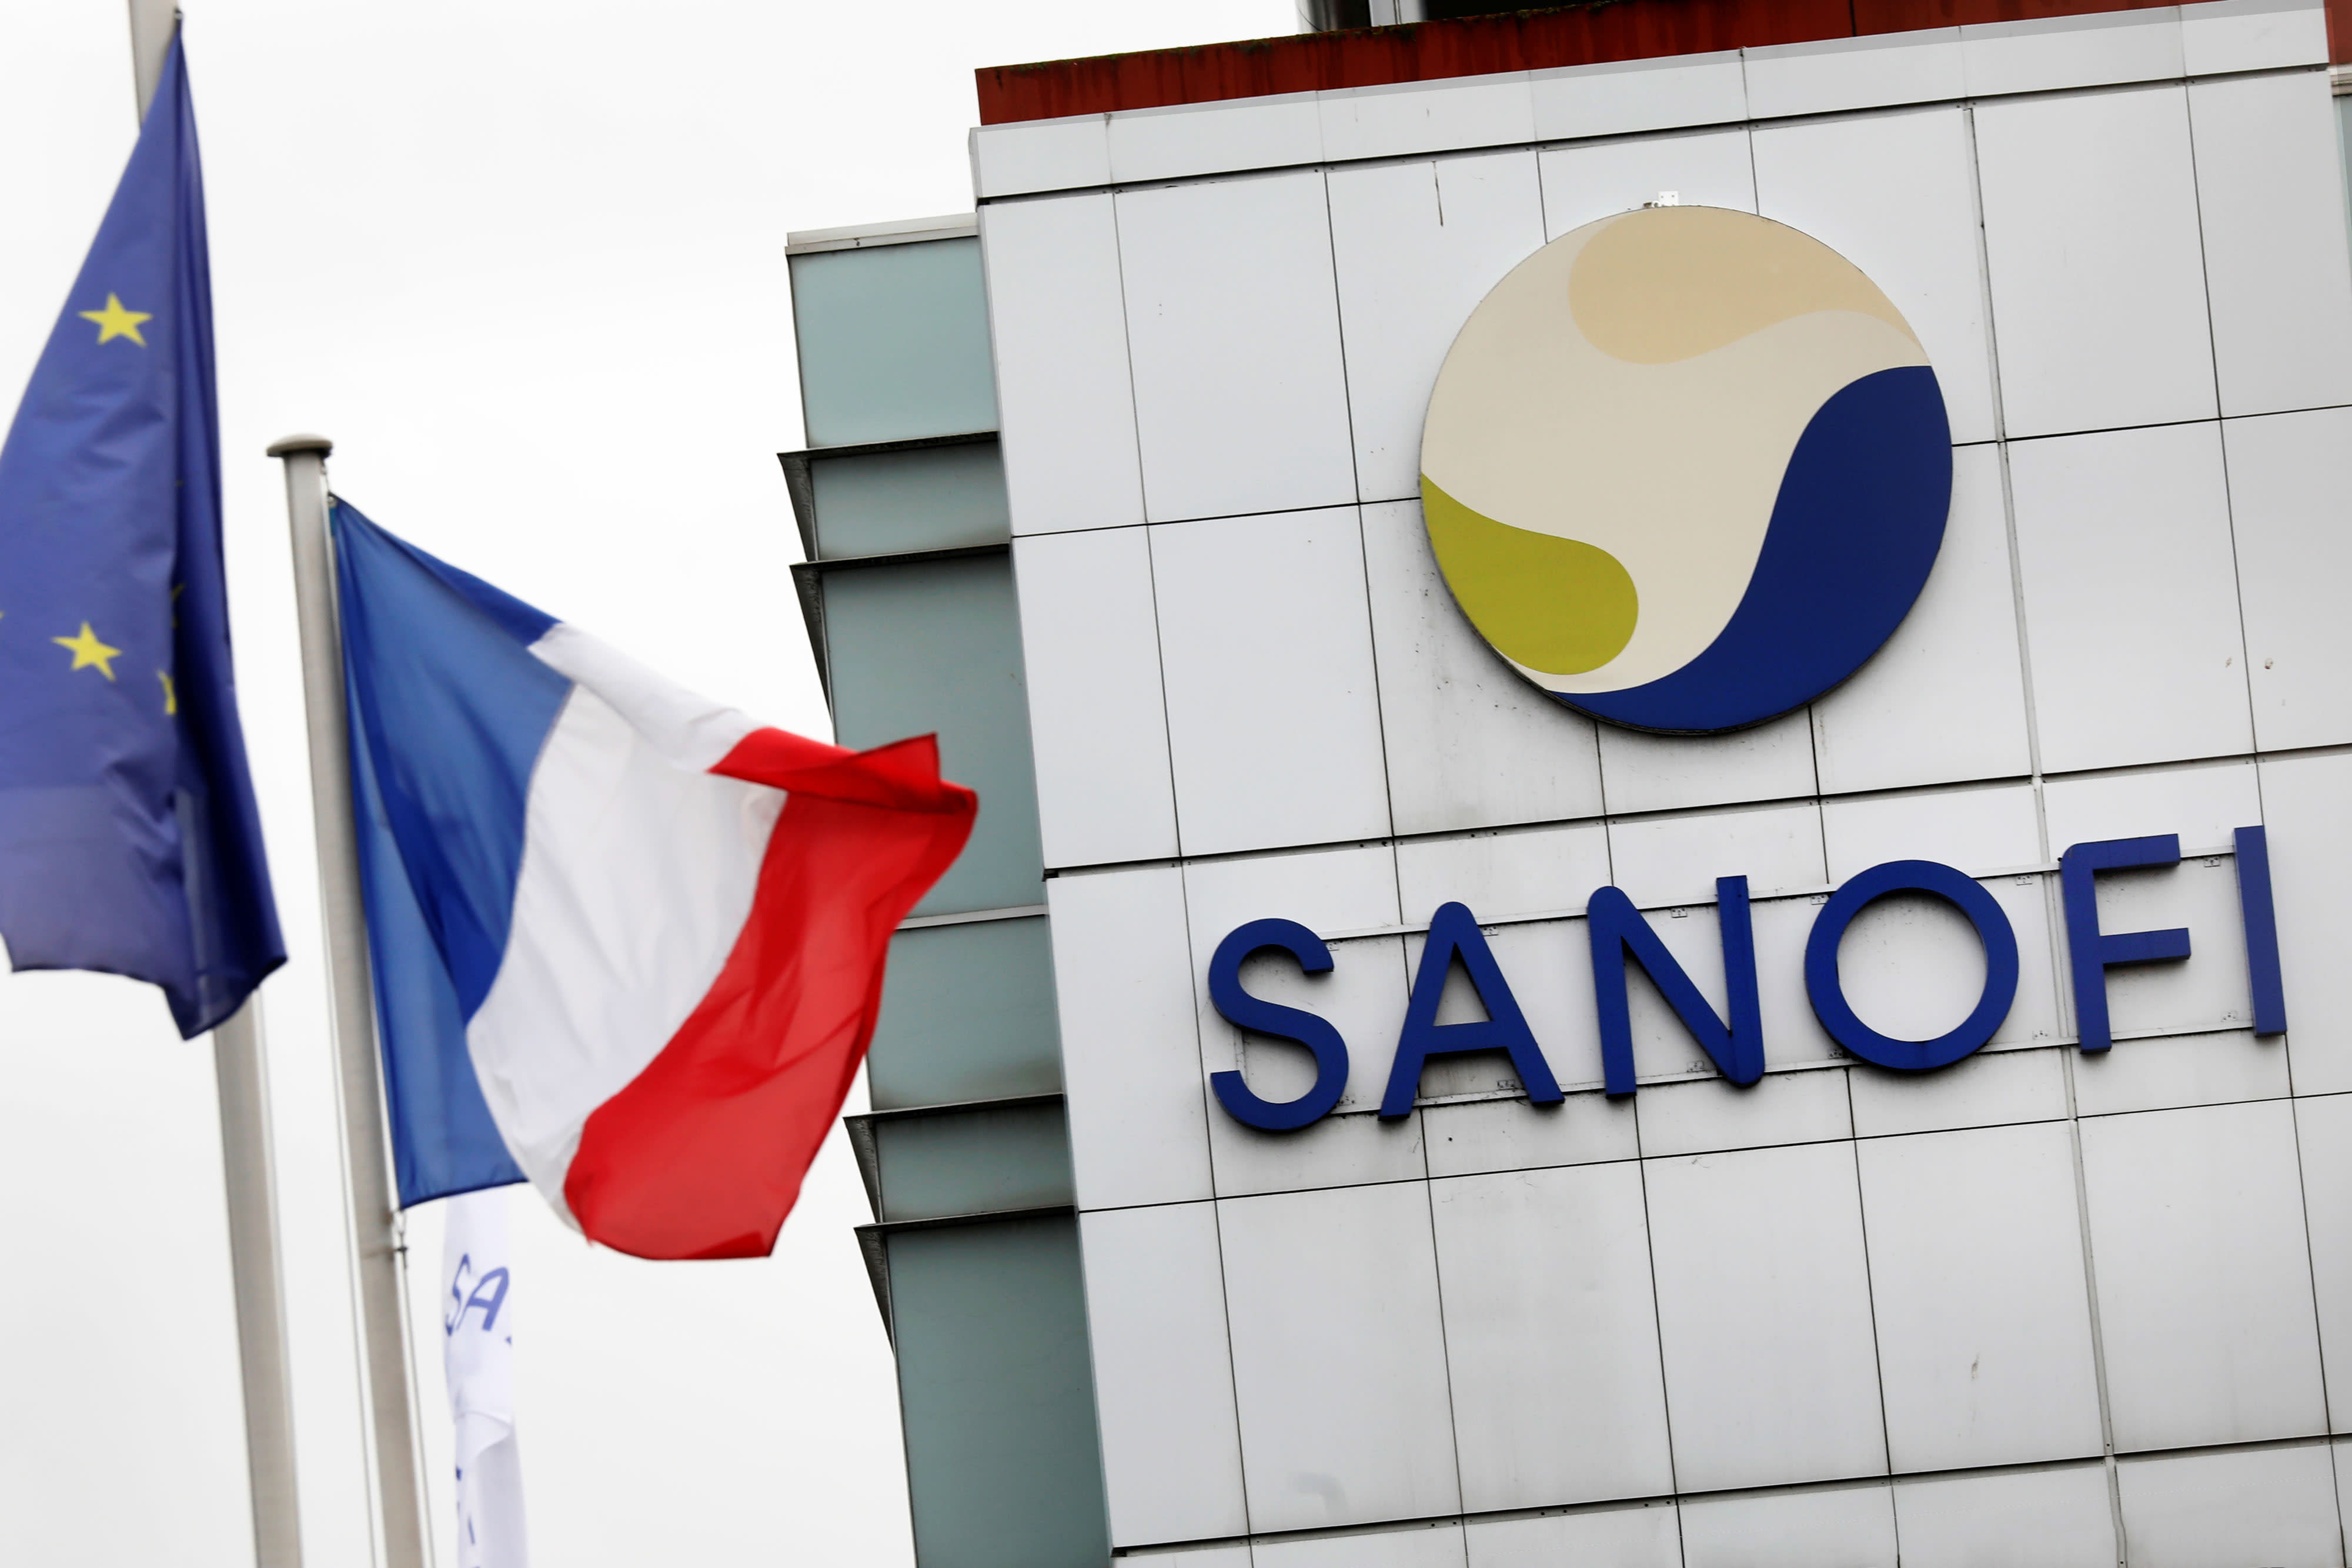 Sanofi to produce 100 million doses of the Pfizer-BioNTech vaccine, says CEO